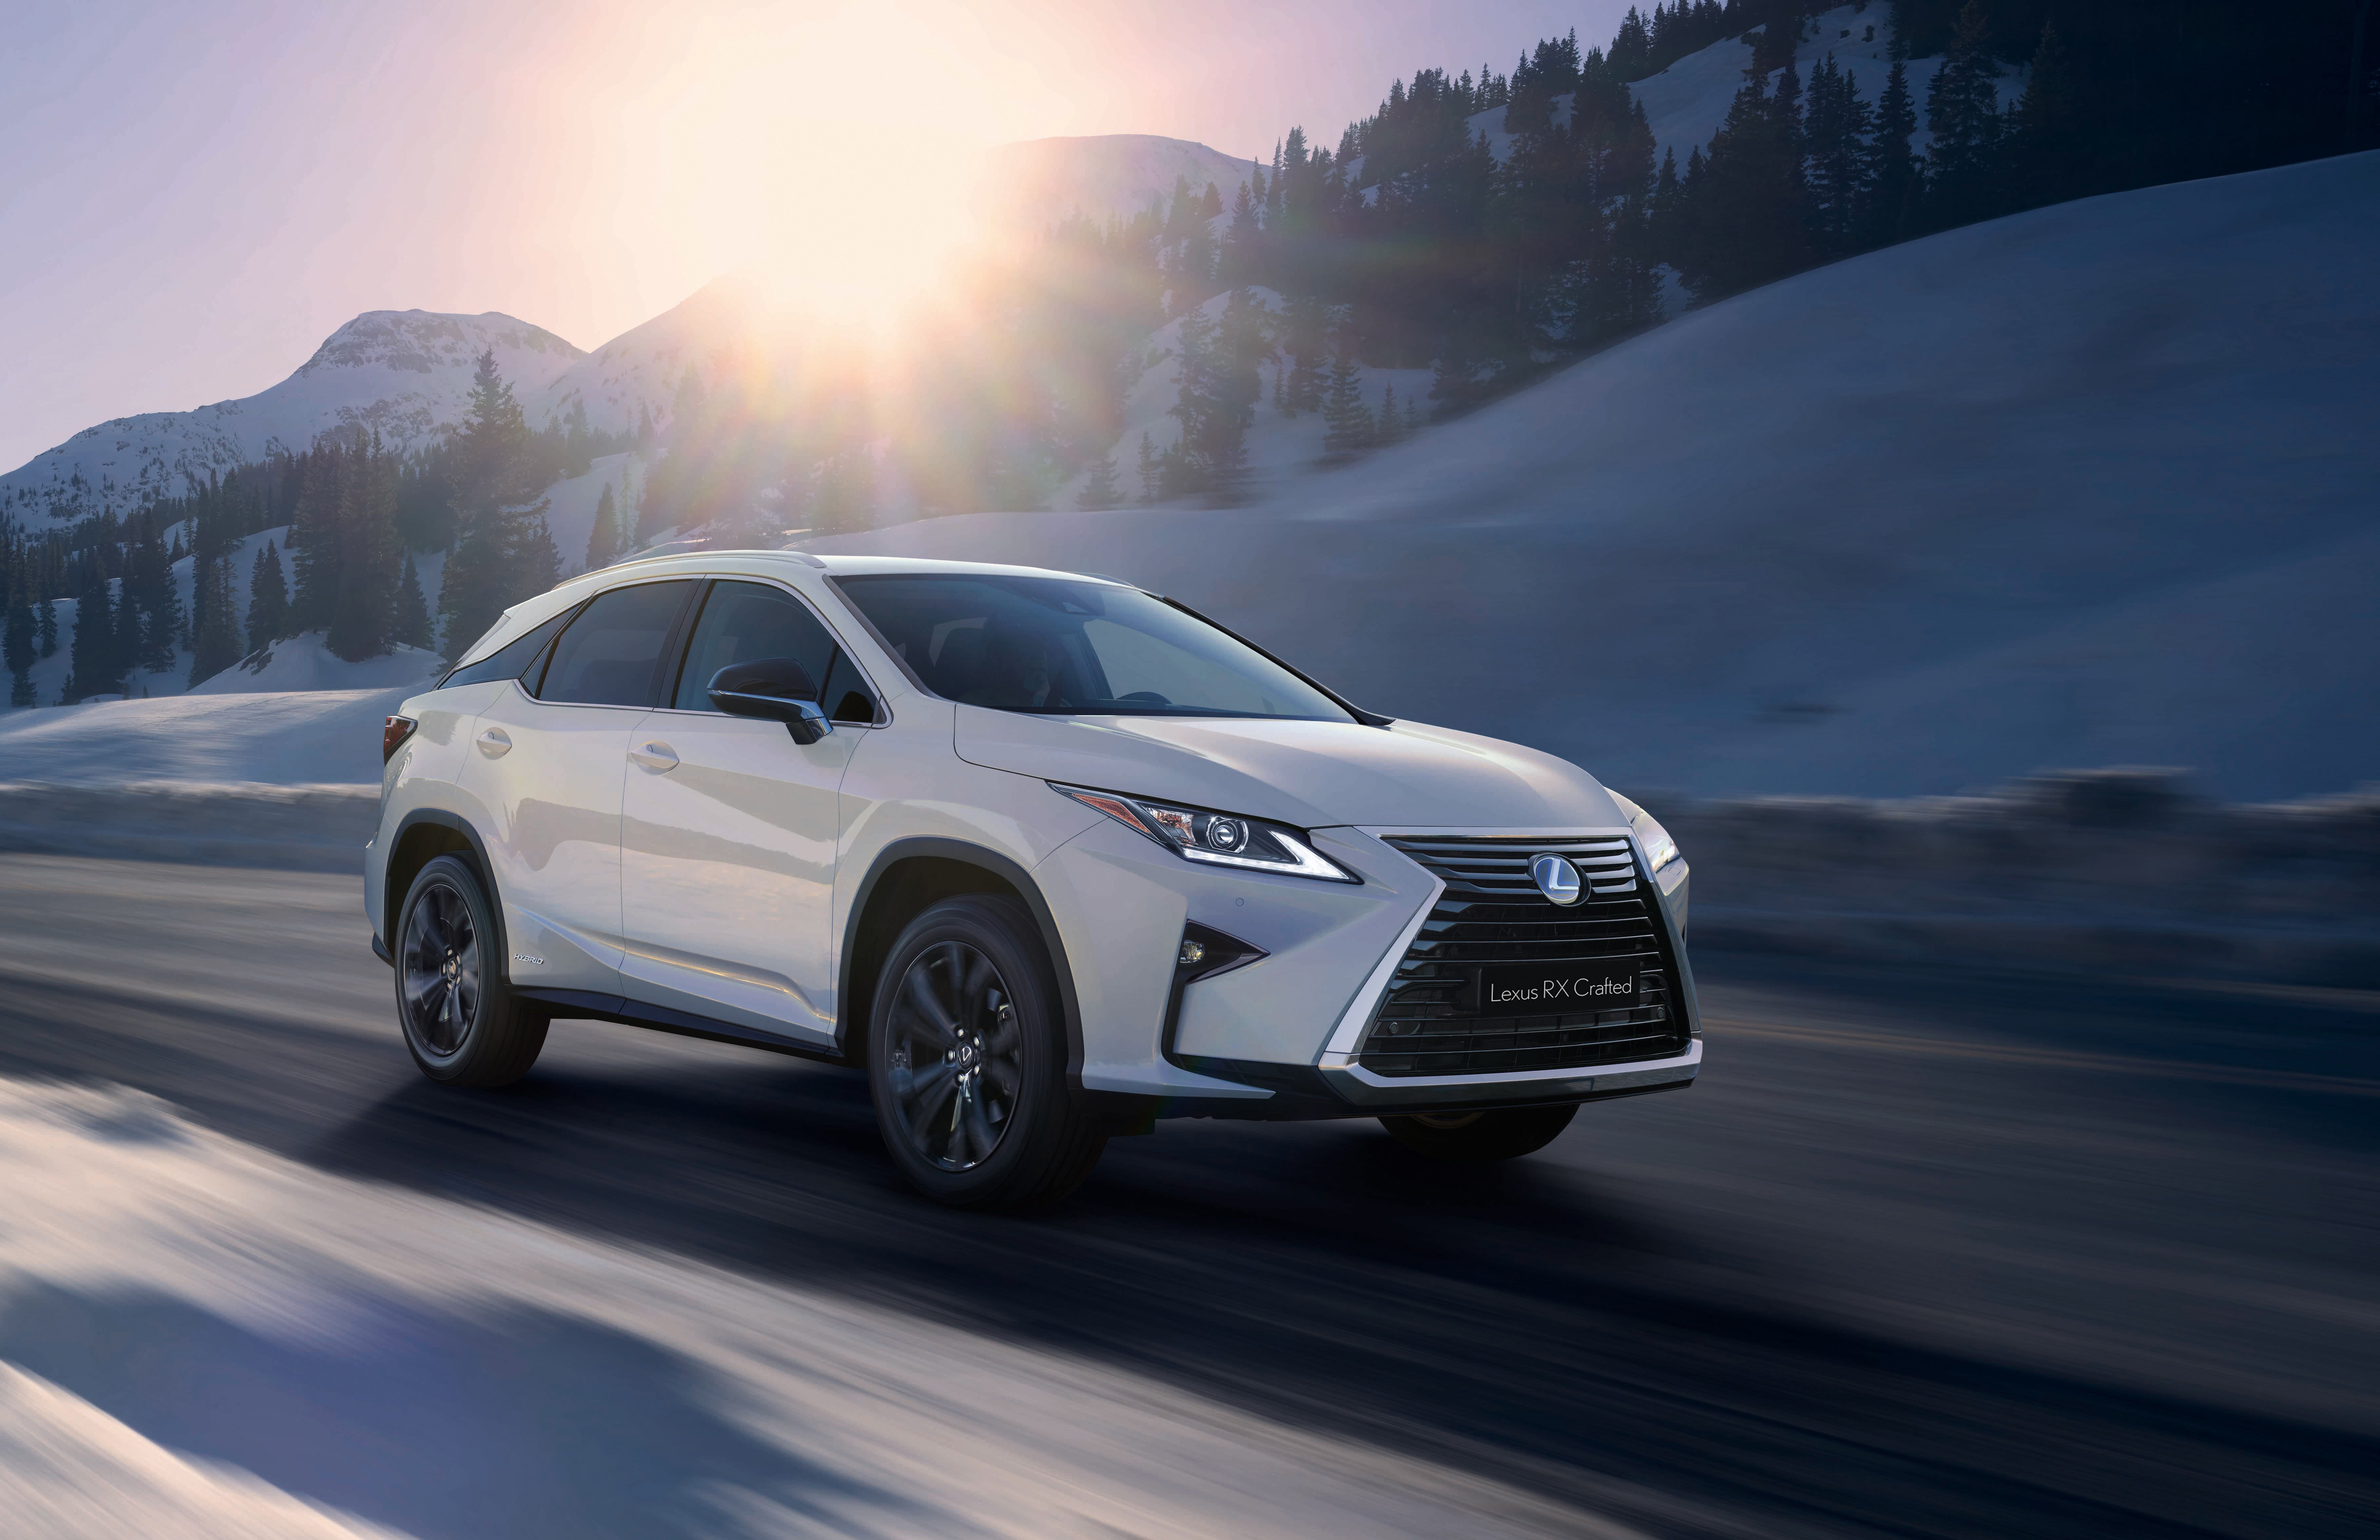 2018 Lexus RX Crafted